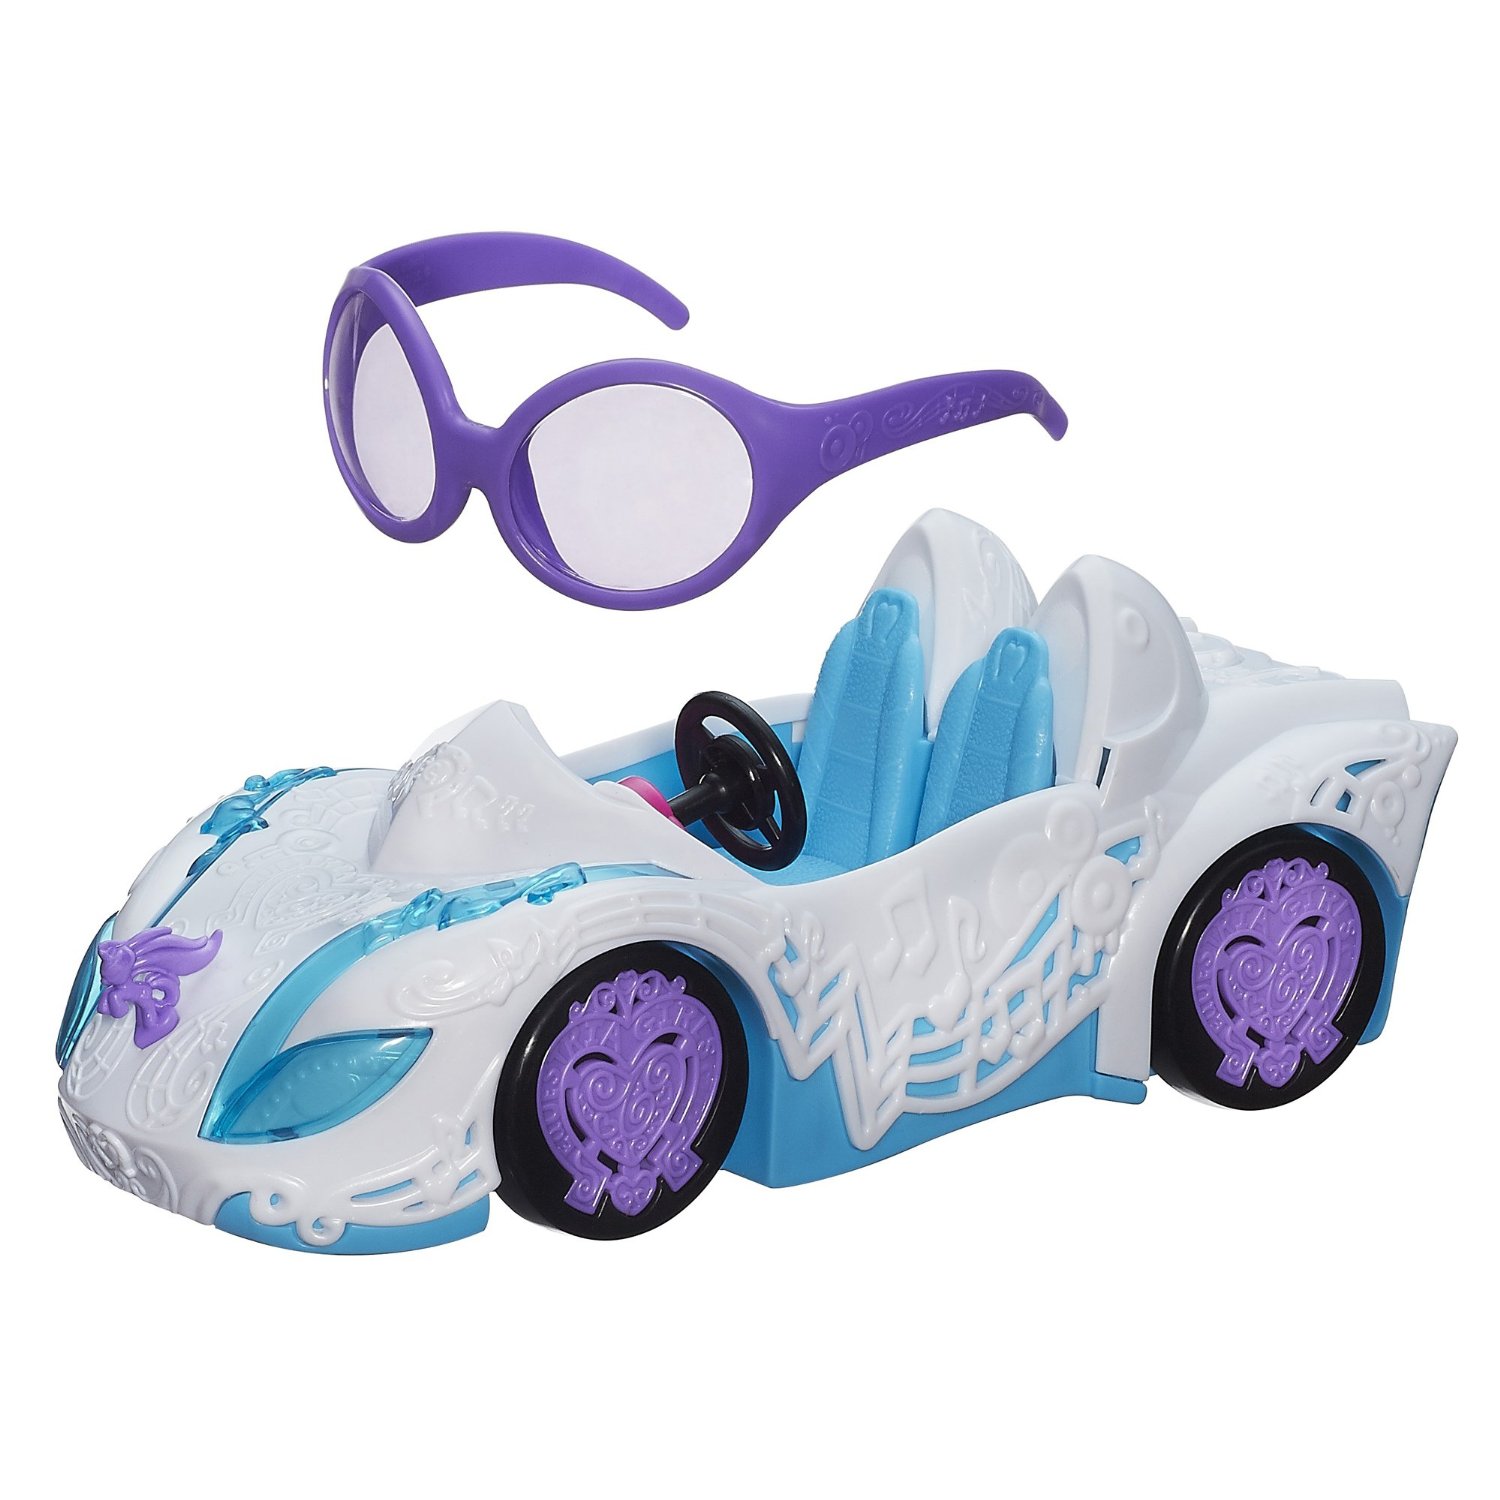 My Little Pony Equestria Rockin Convertible Vehicle Only $12.00 – 45% Savings